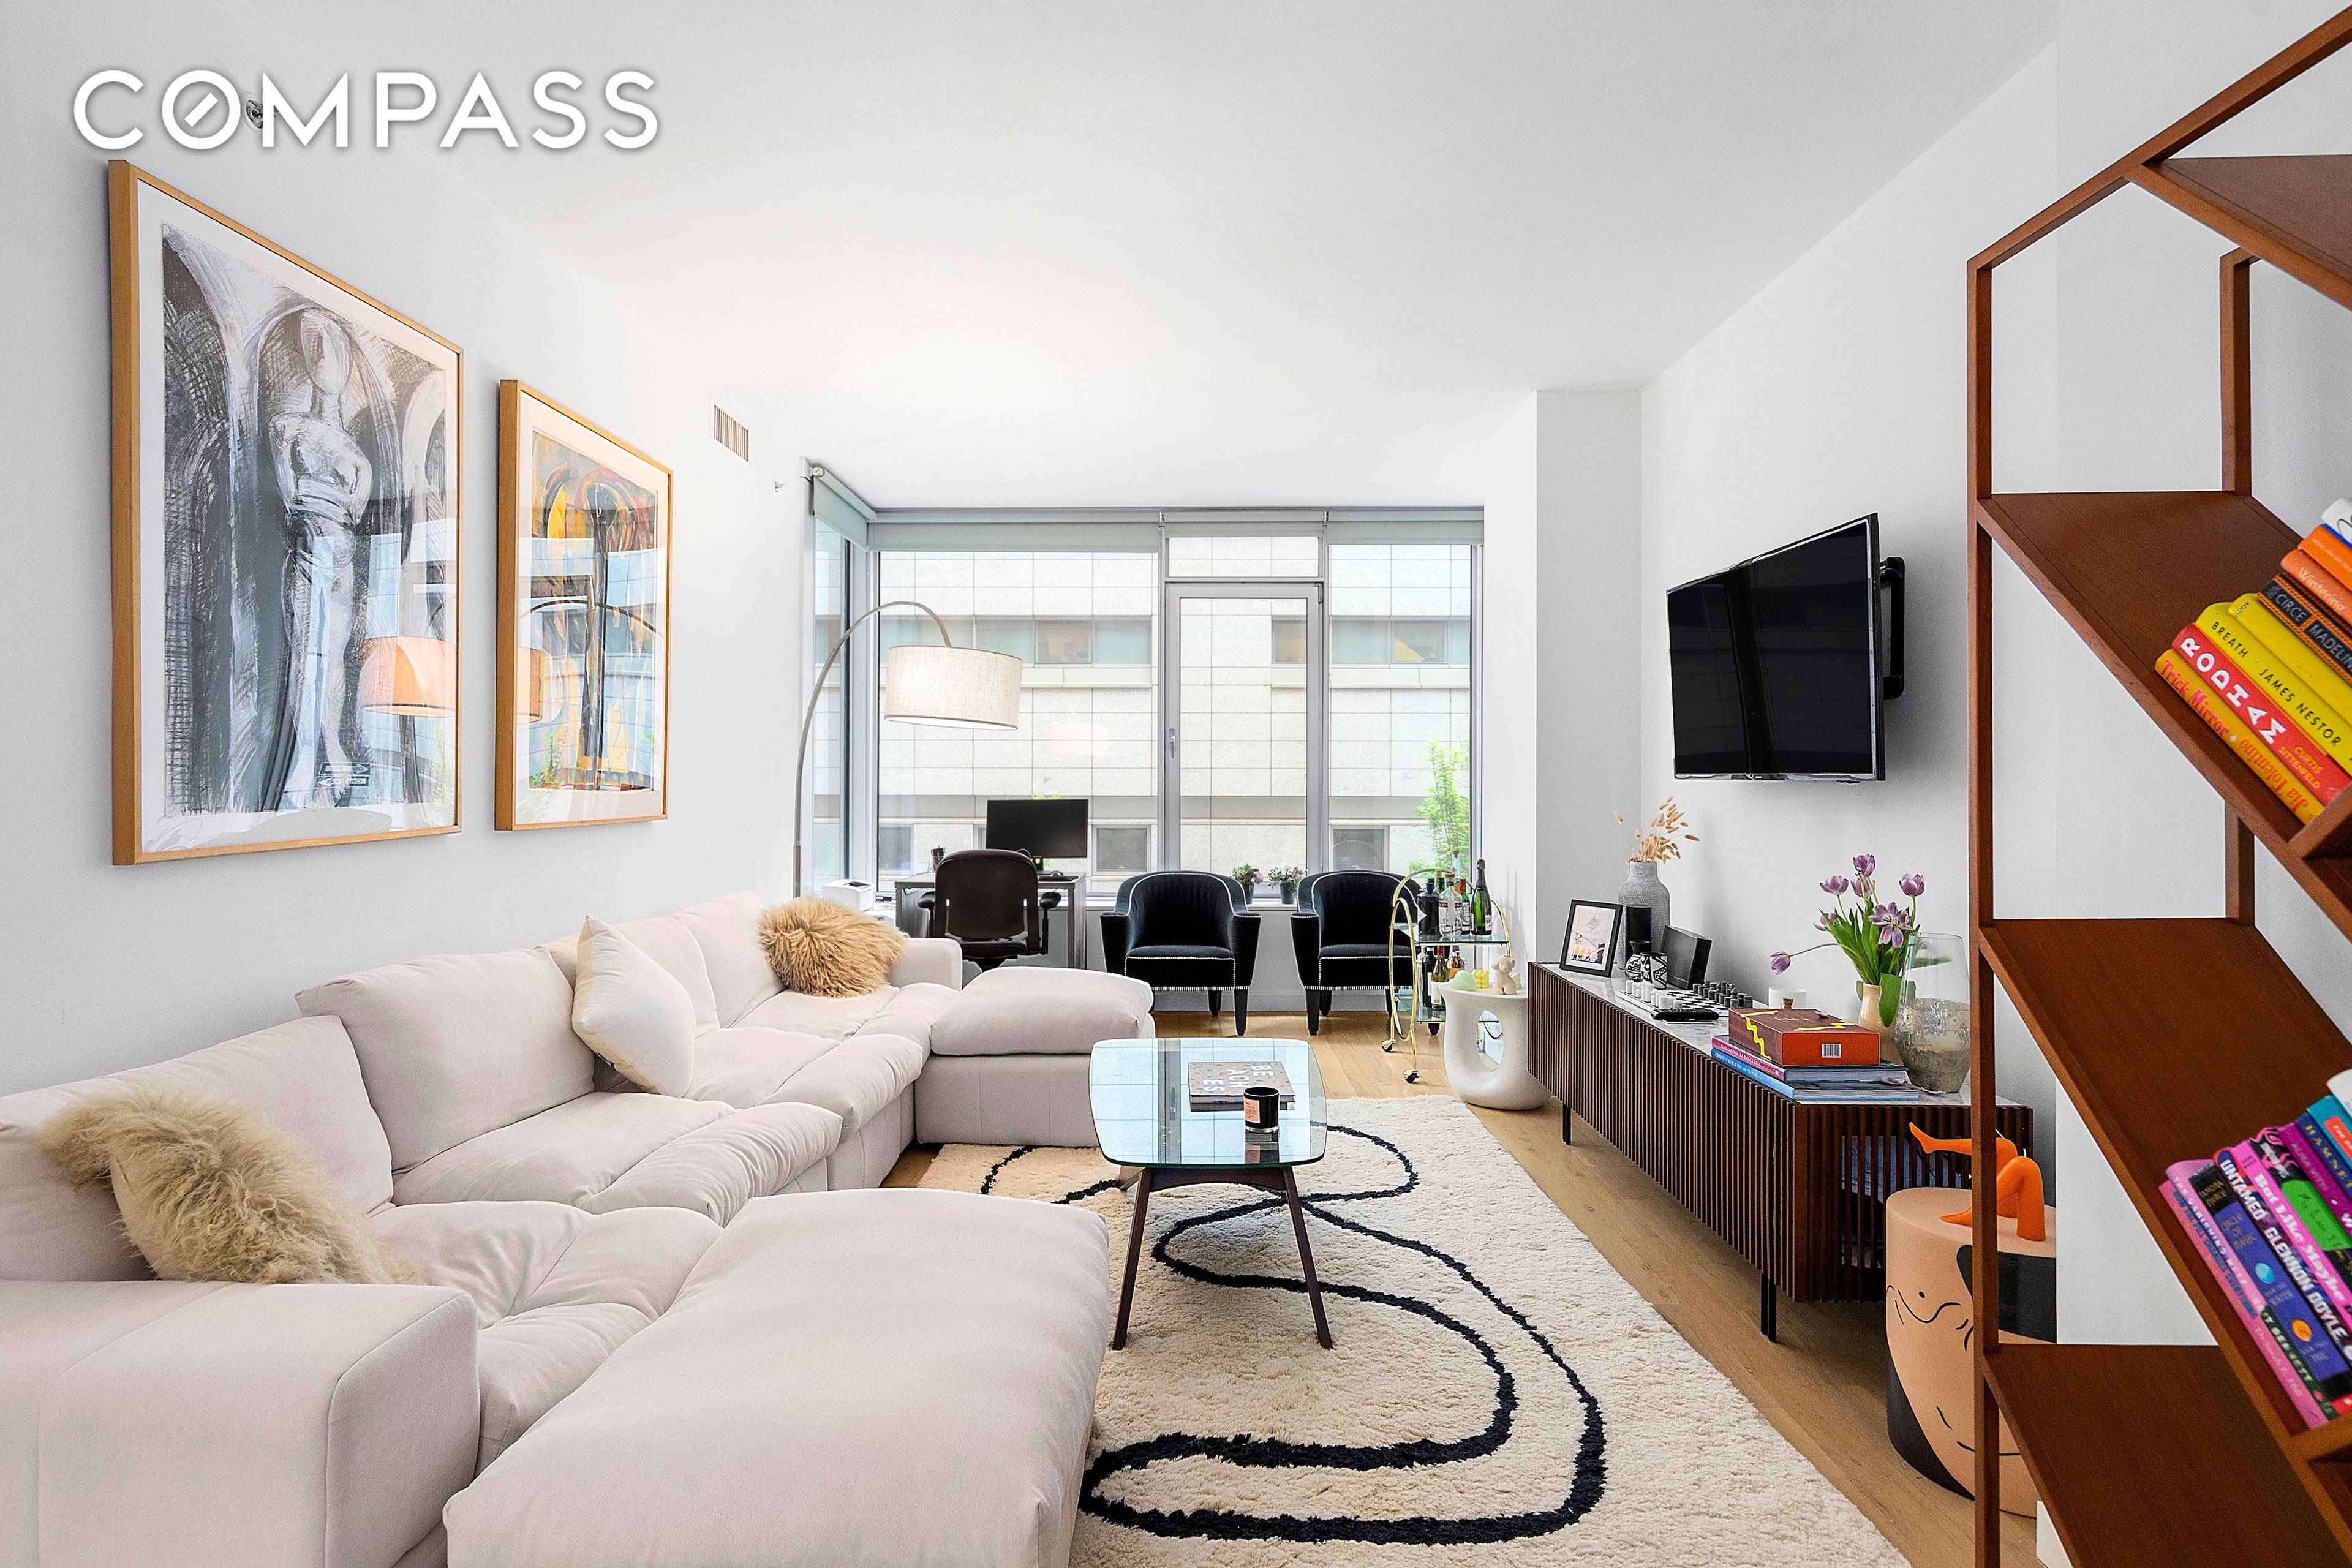 This beautiful one bedroom apartment with state of the art kitchen, oversized floor to ceiling windows, central AC and heating, washer dryer and ample closet space.